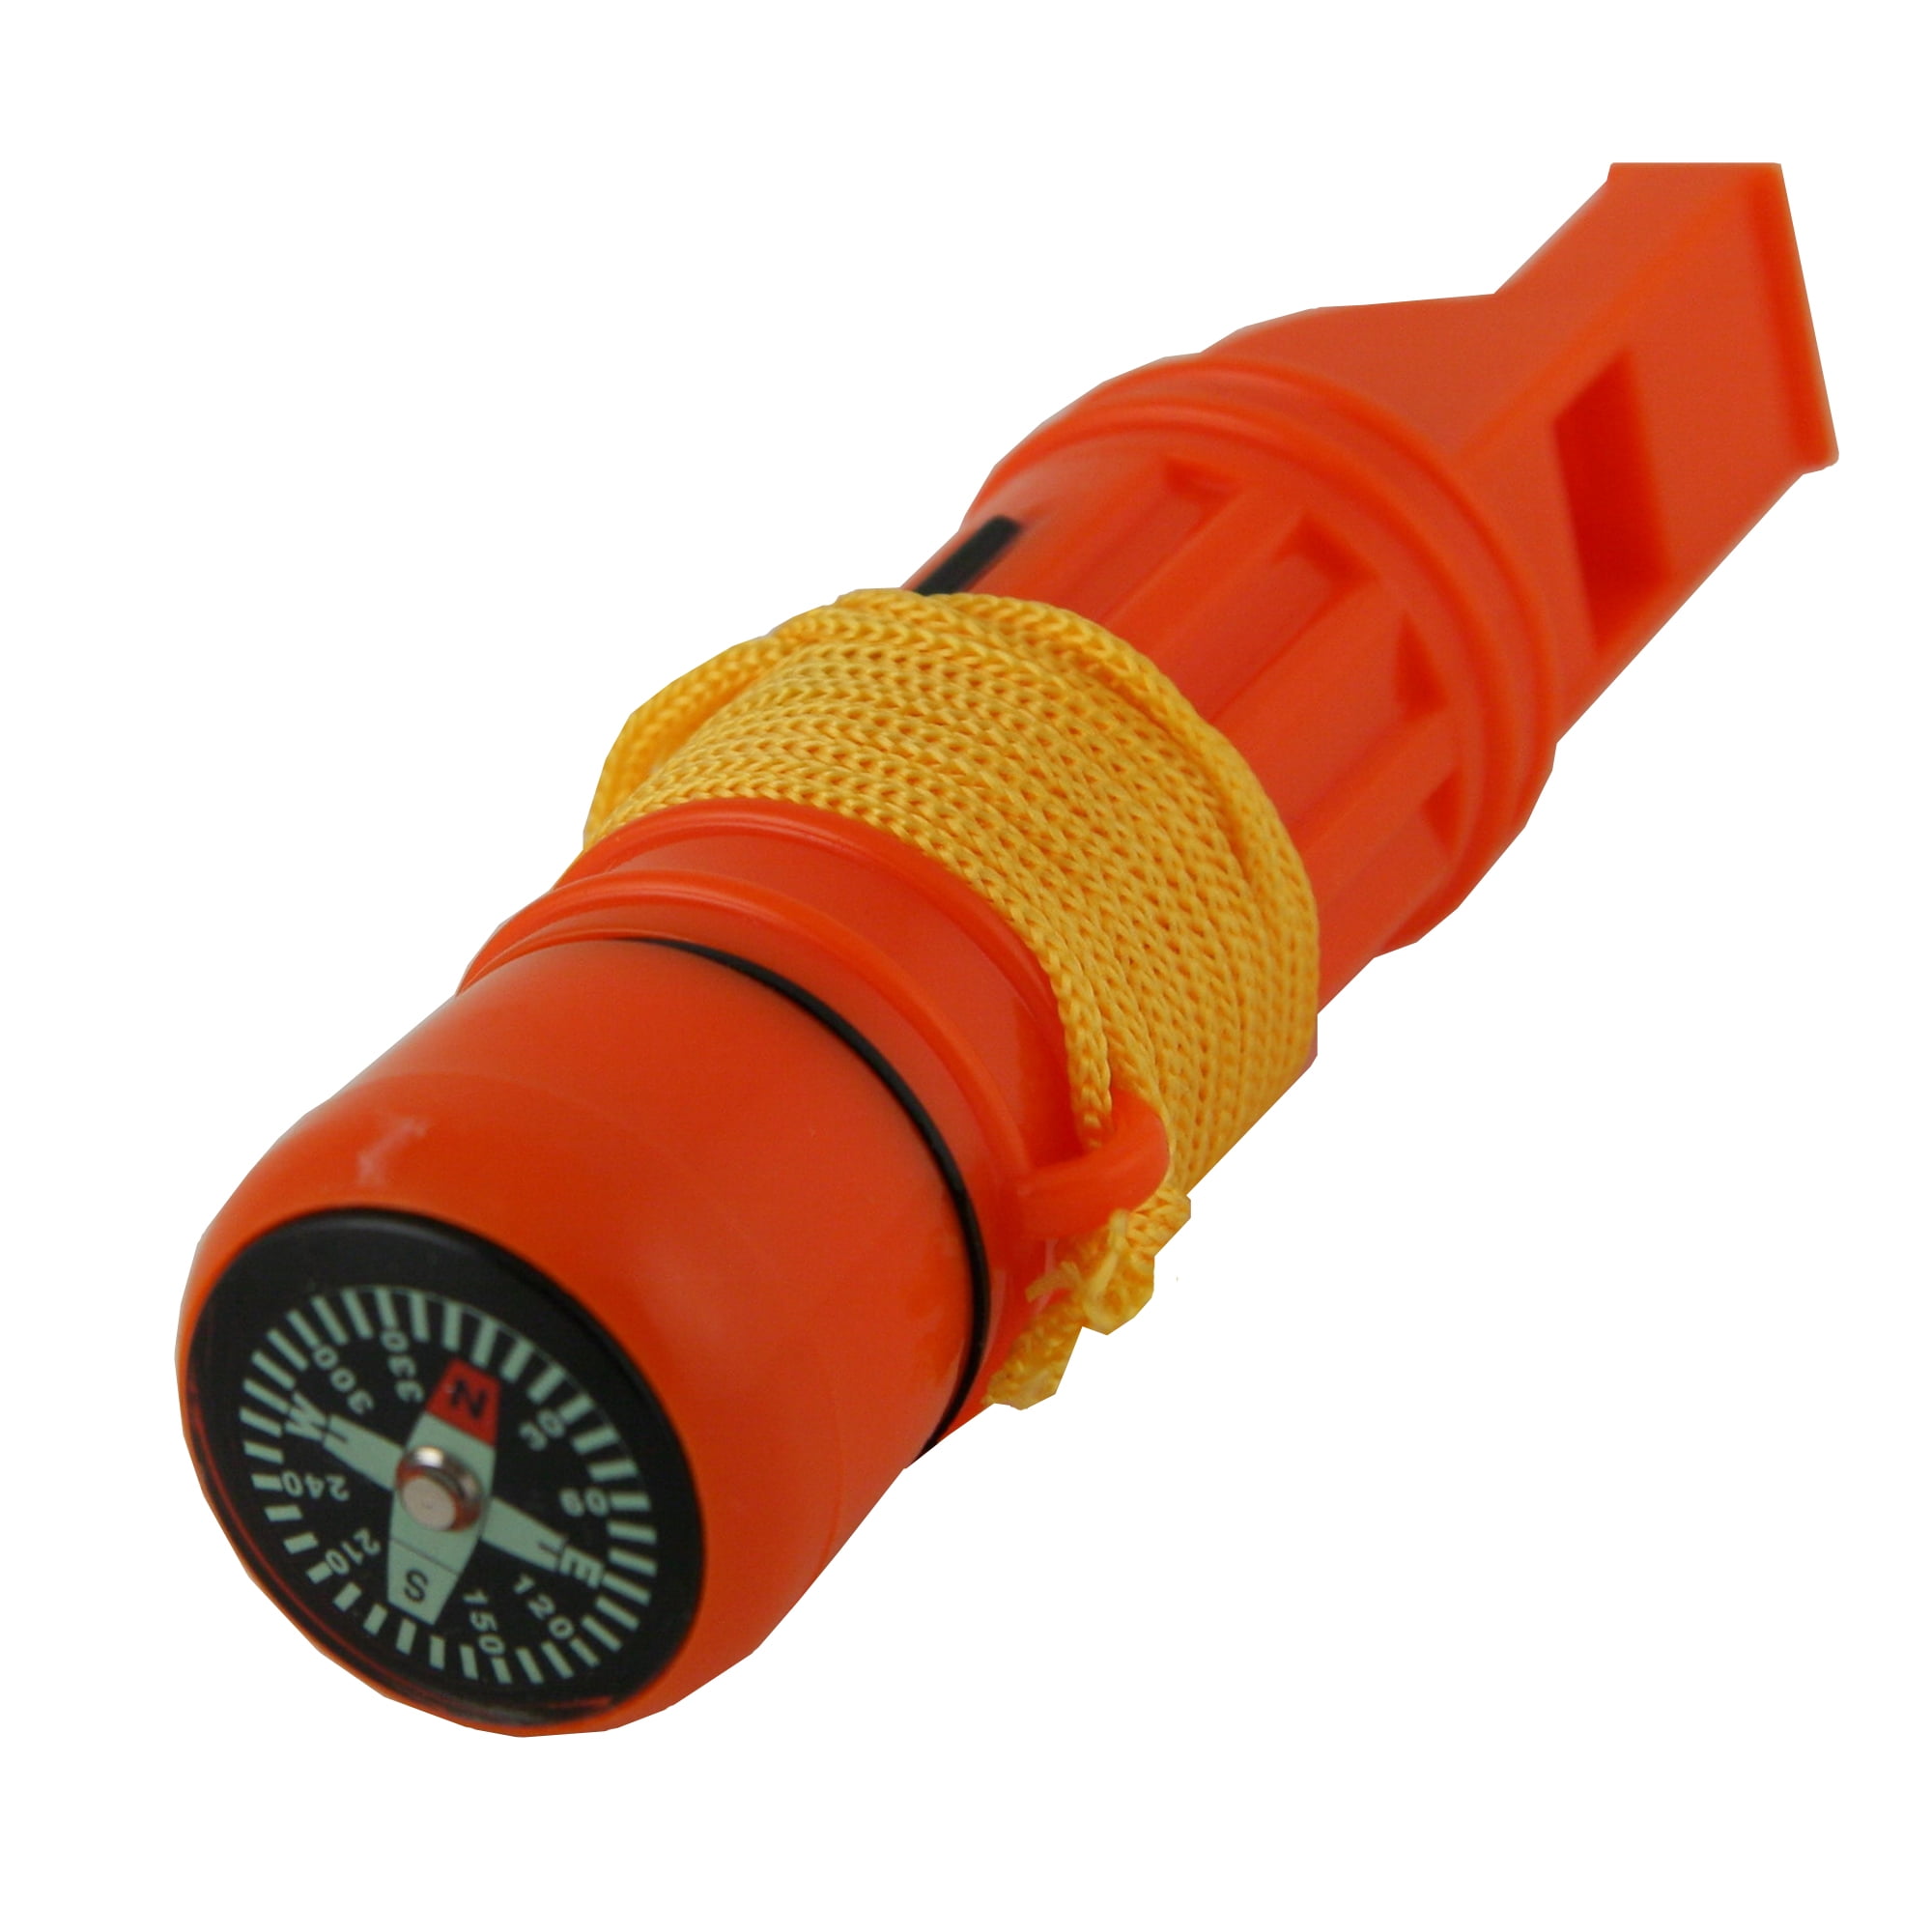 Rescue Whistle 5 Pcs High Visibility Emergency Survival Signaling Device